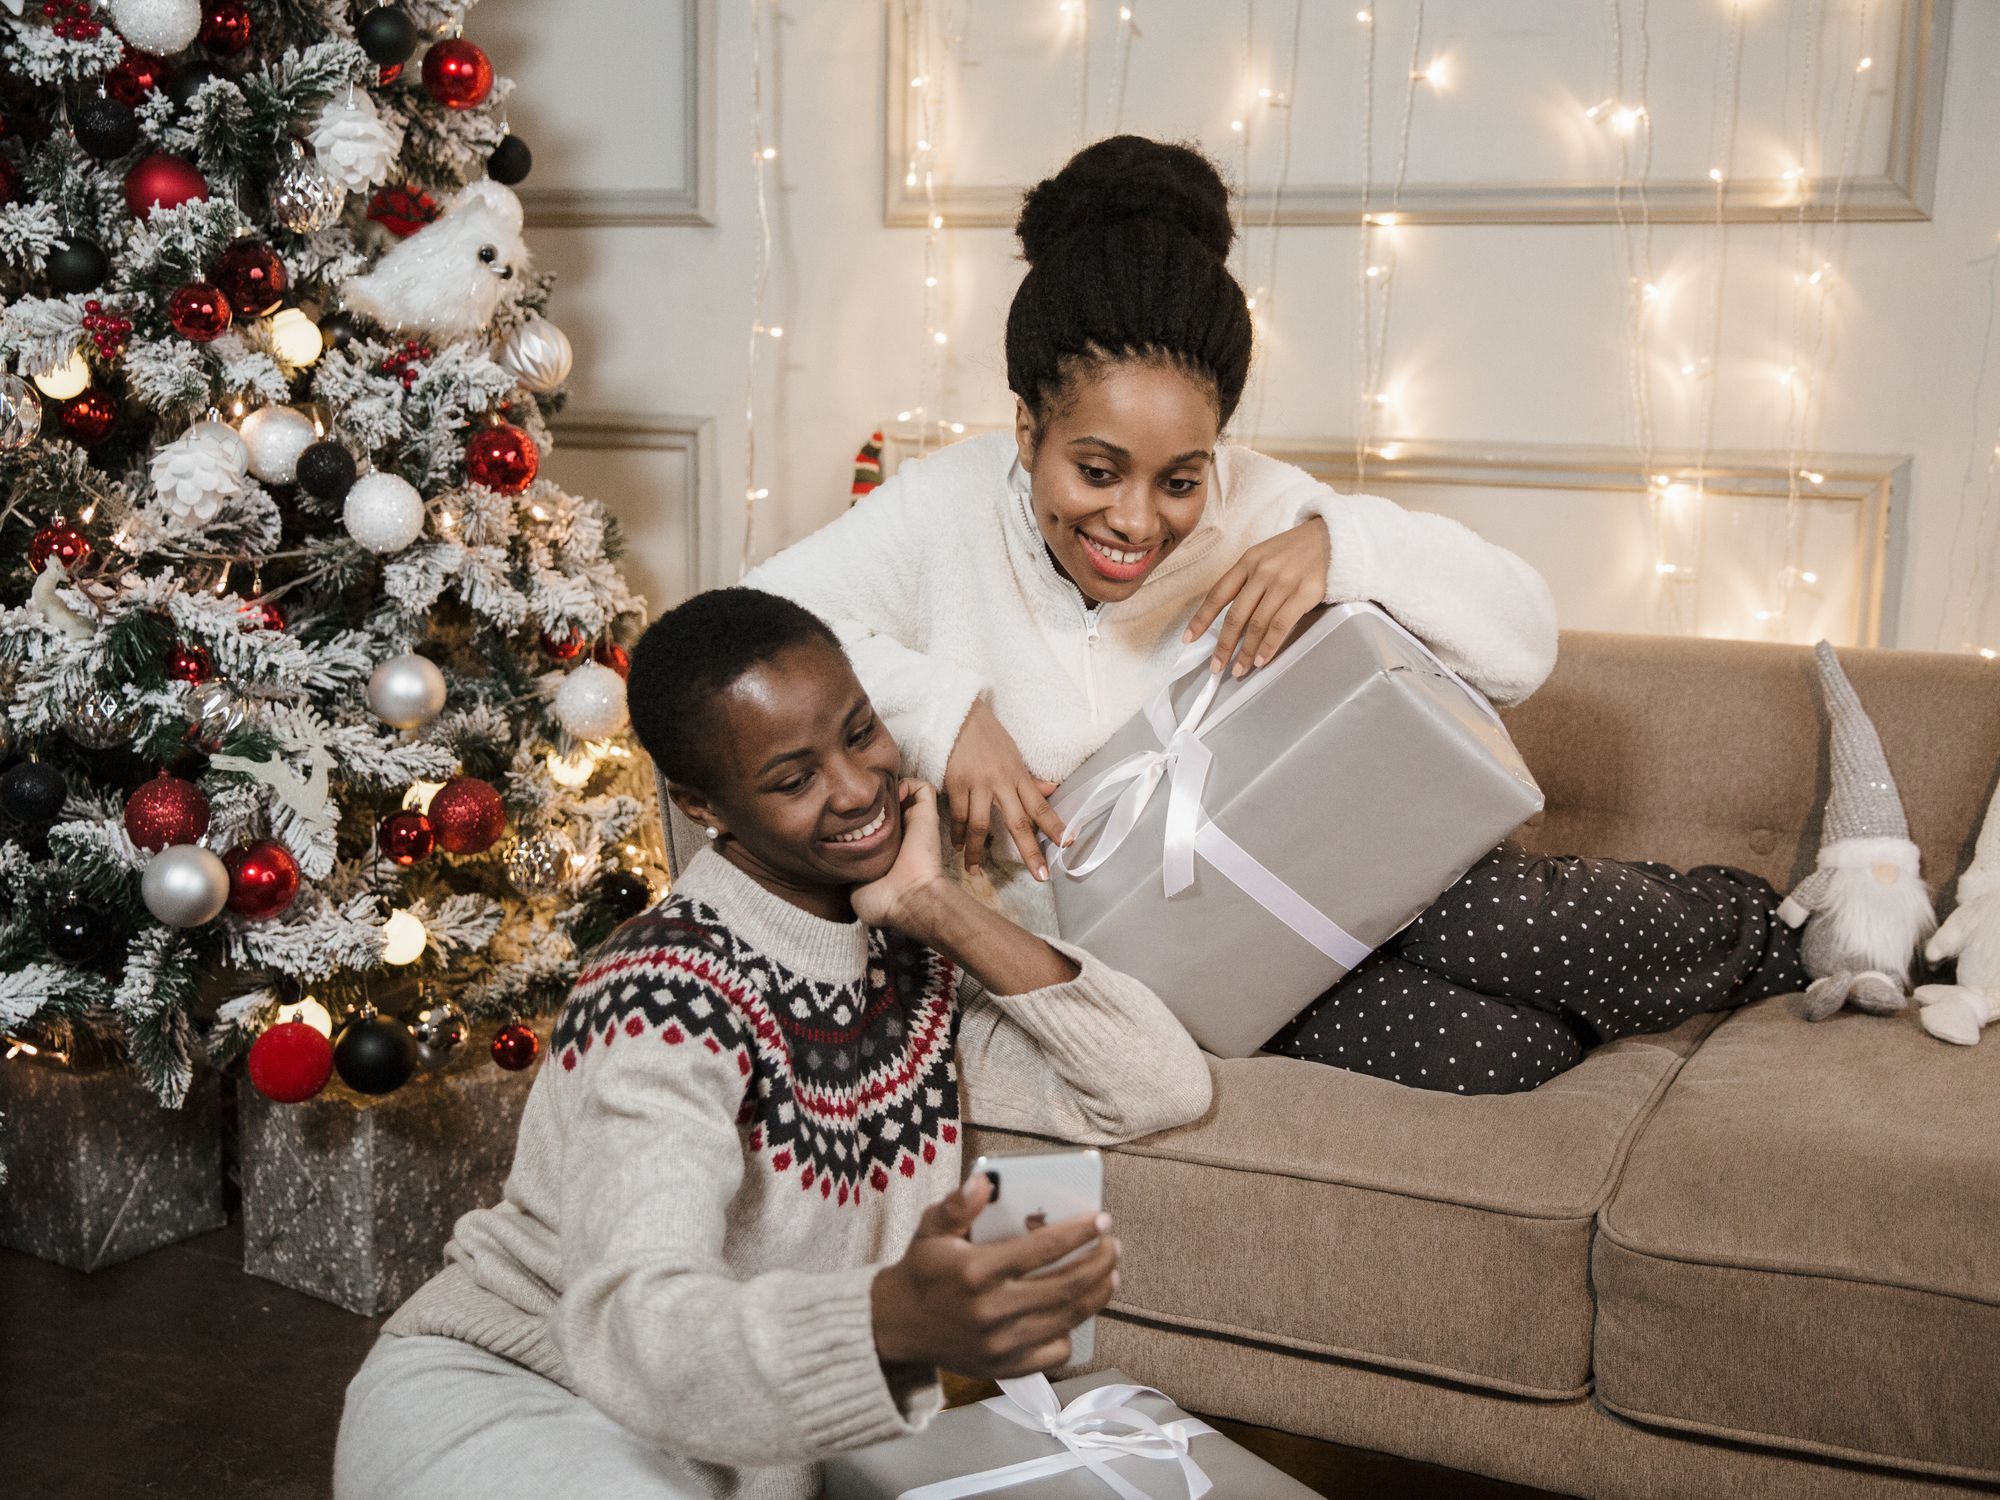 Buy Black: The 2021 Black-Owned Holiday Gift Guide | The Best Brands for Fashion, Kids, Home, and More